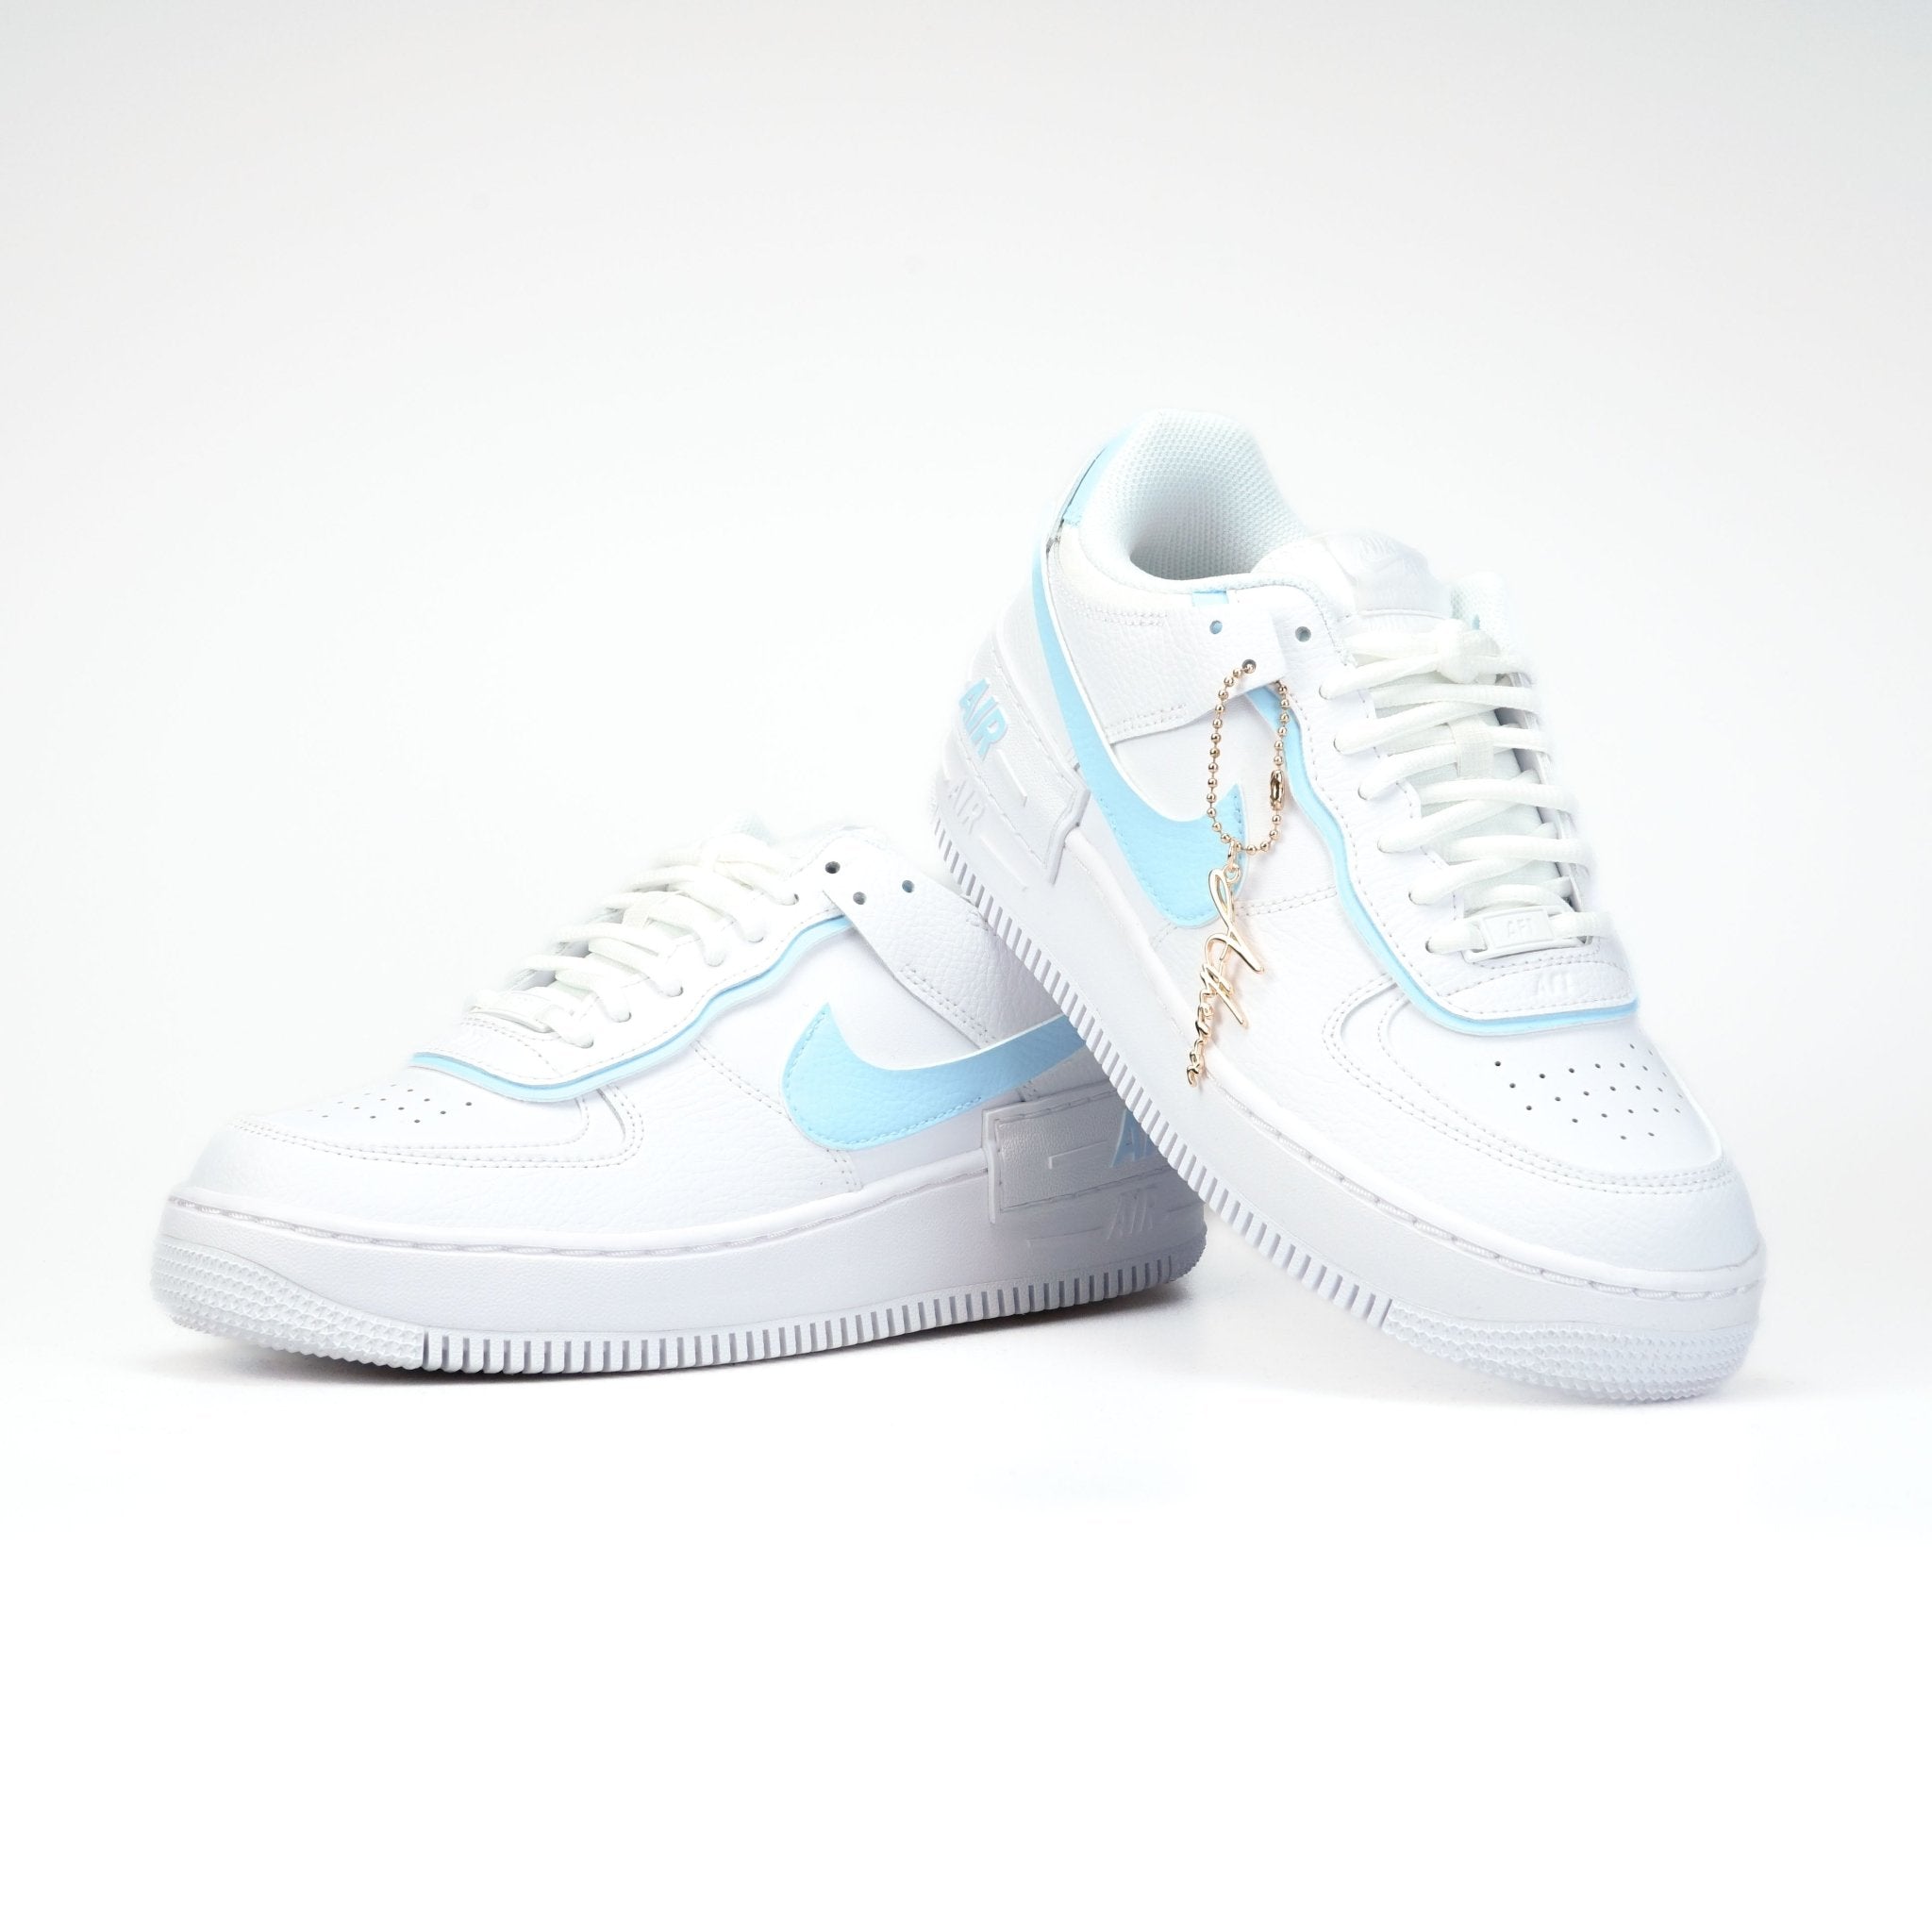 Nike Air Force 1 Shadow 07 Painted Shoes Sneaker For Women And Men Light Blue – ATHENA